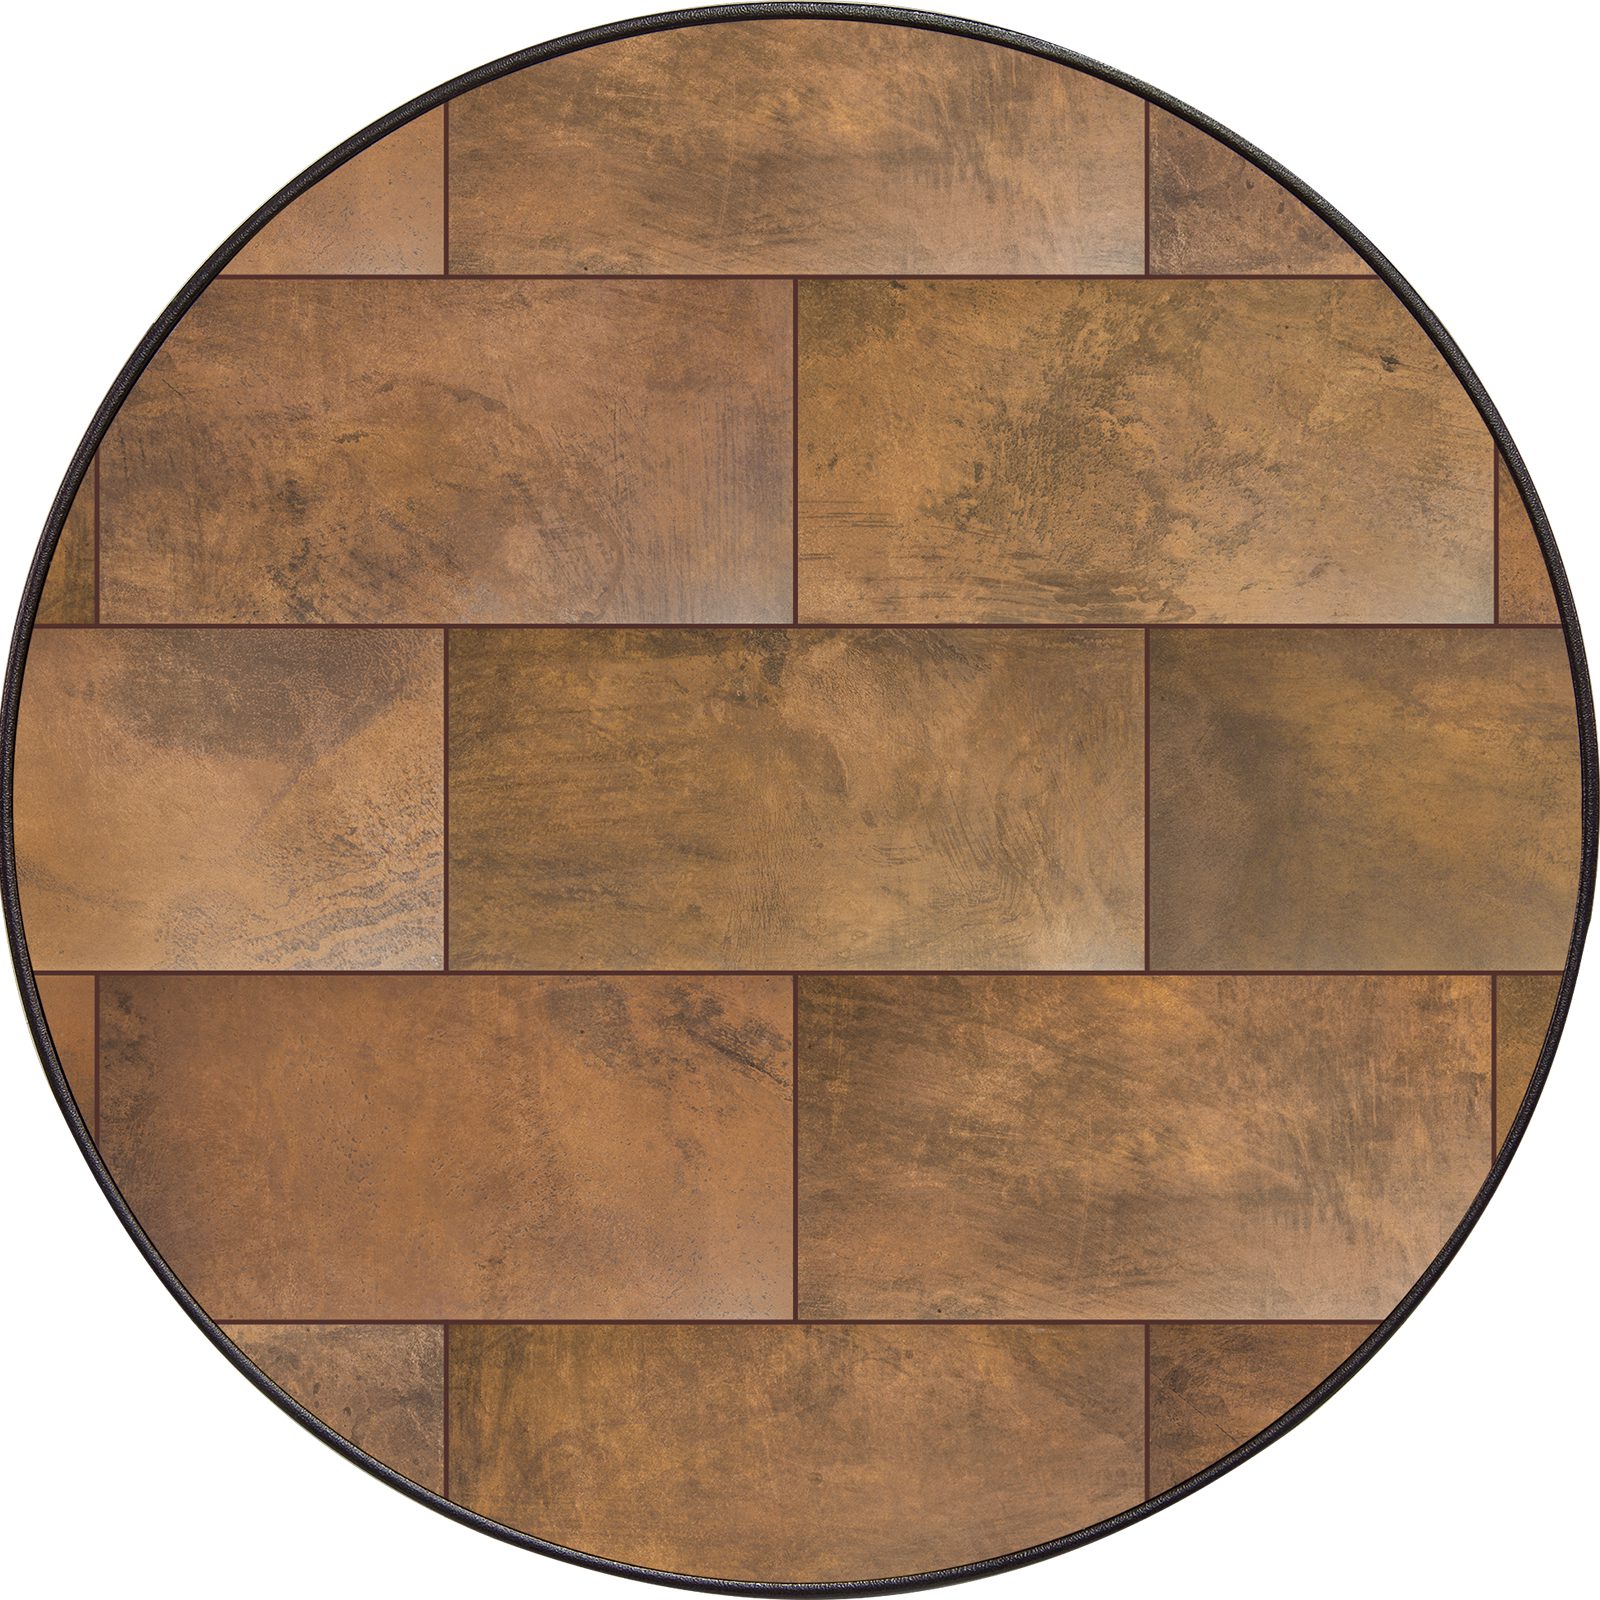 54" Round City Top - Porcelain Table Tops - City Series 19